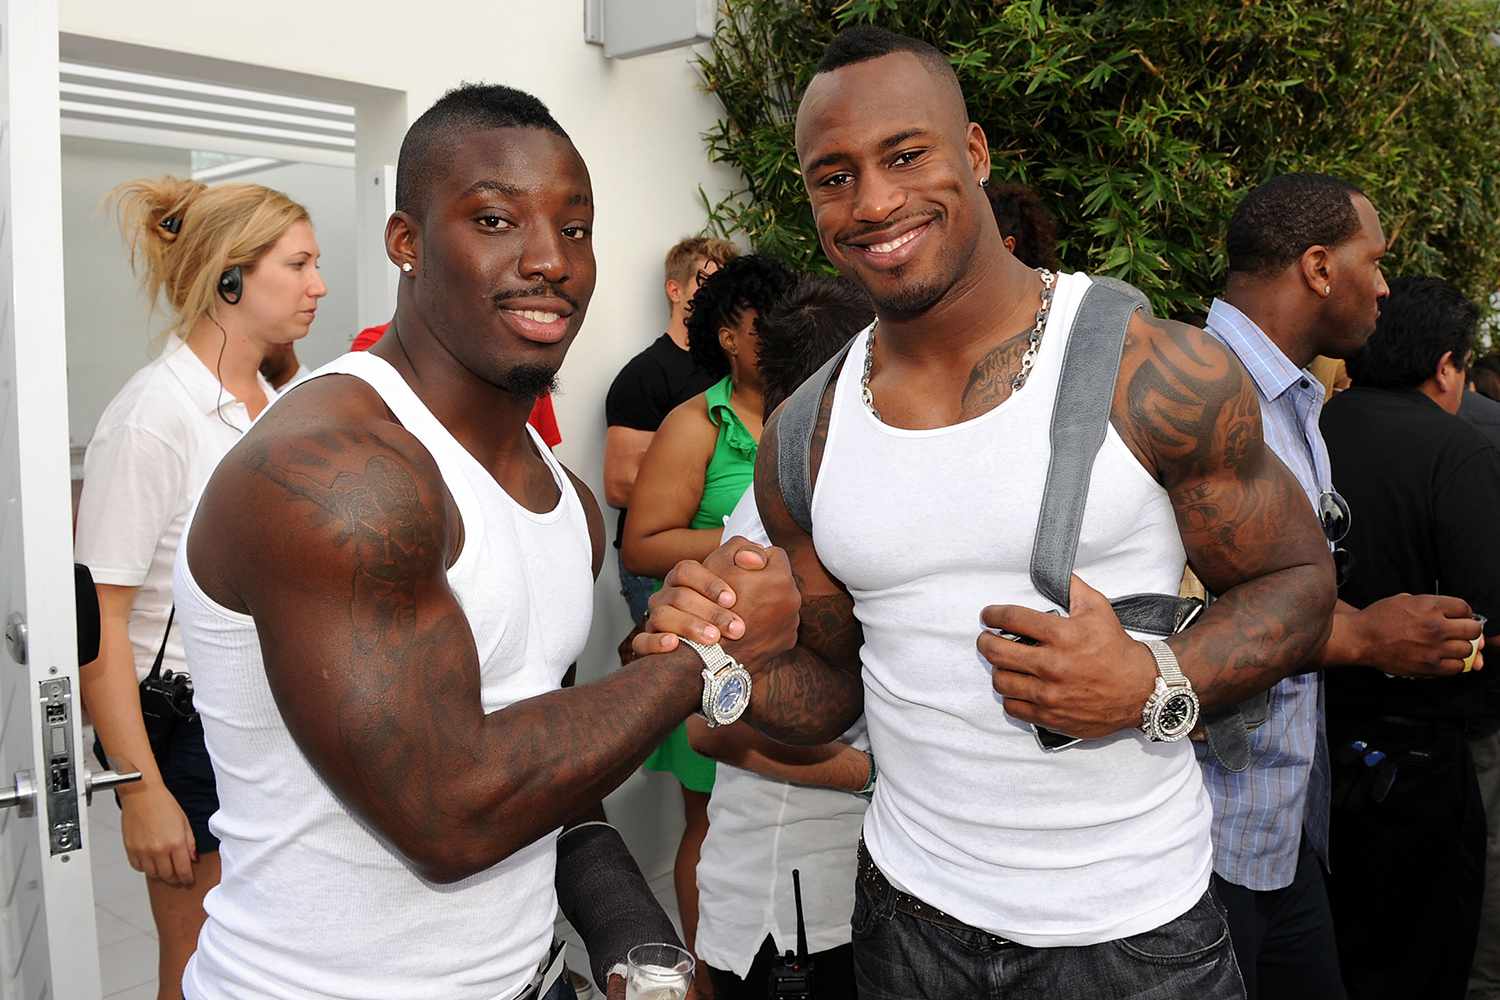 NFL players Vontae Davis and Vernon Davis attend the launch of New Tide Plus Febreze Freshness Sport at The Recreation Deck at The W South Beach